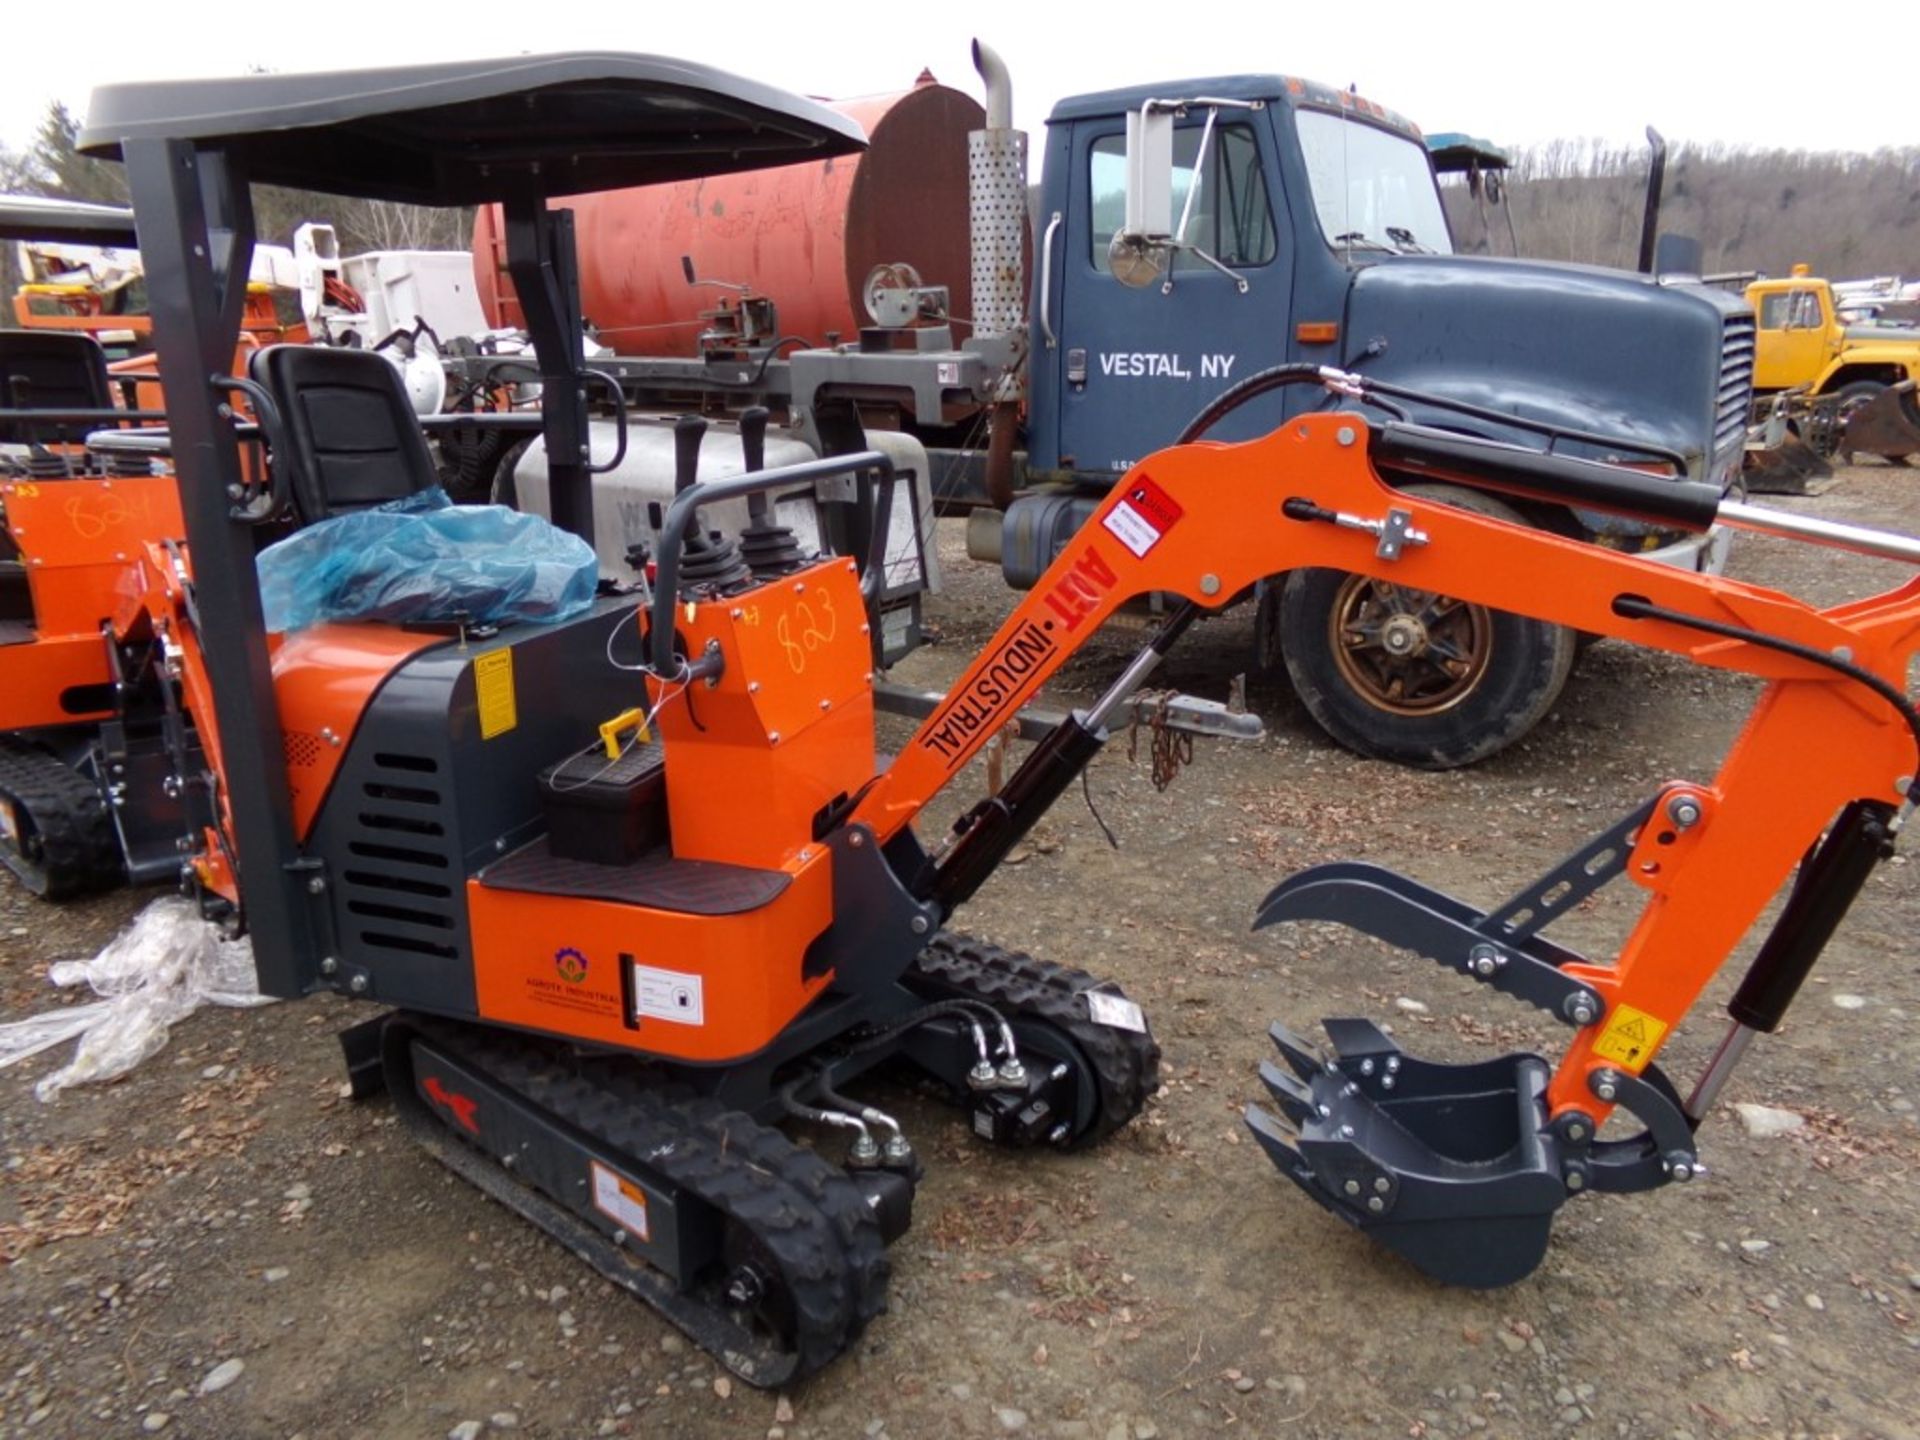 New AGT L12 Mini Excavator with Canopy, Has Manual Thumb, Orange, Ser # 633466 - Image 2 of 4